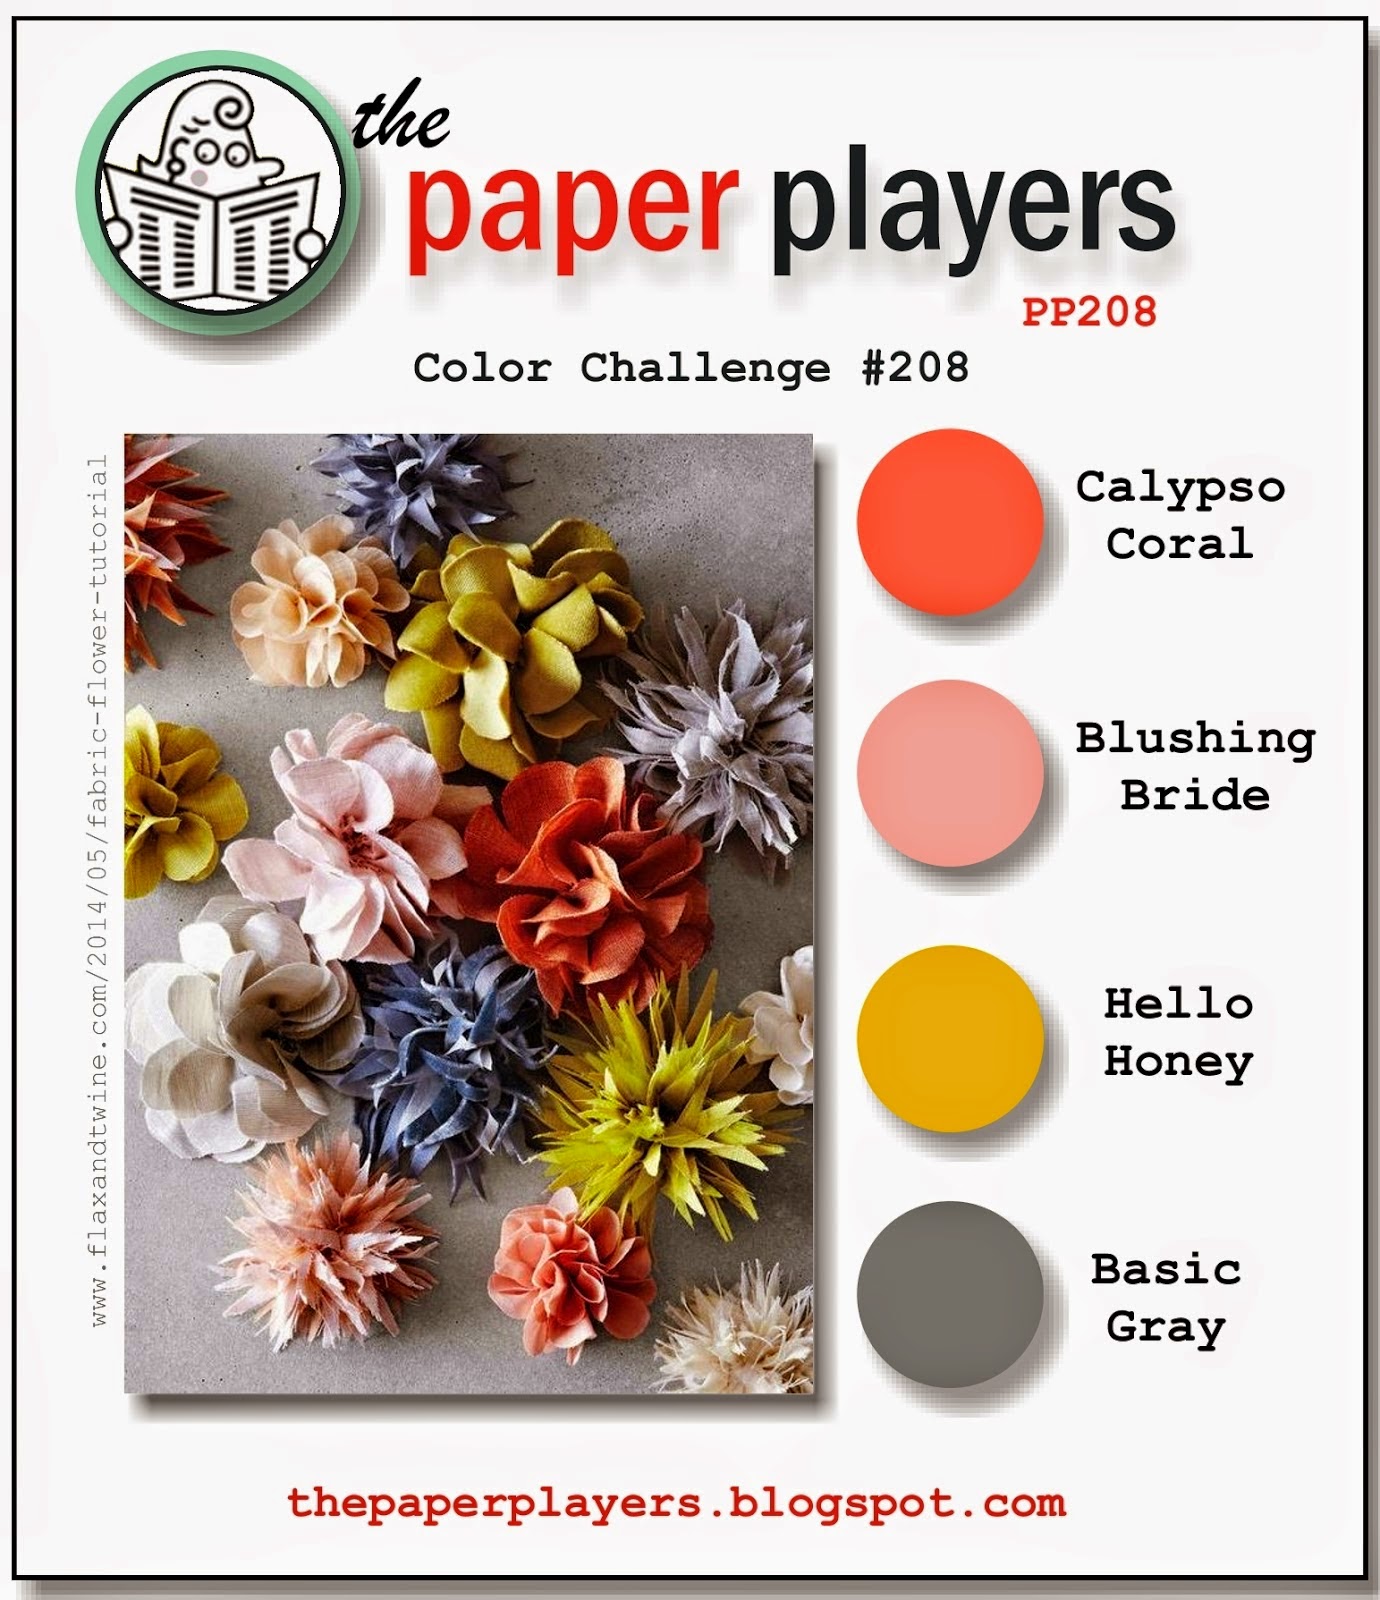 http://thepaperplayers.blogspot.ca/2014/08/paper-players-challenge-208-color.html